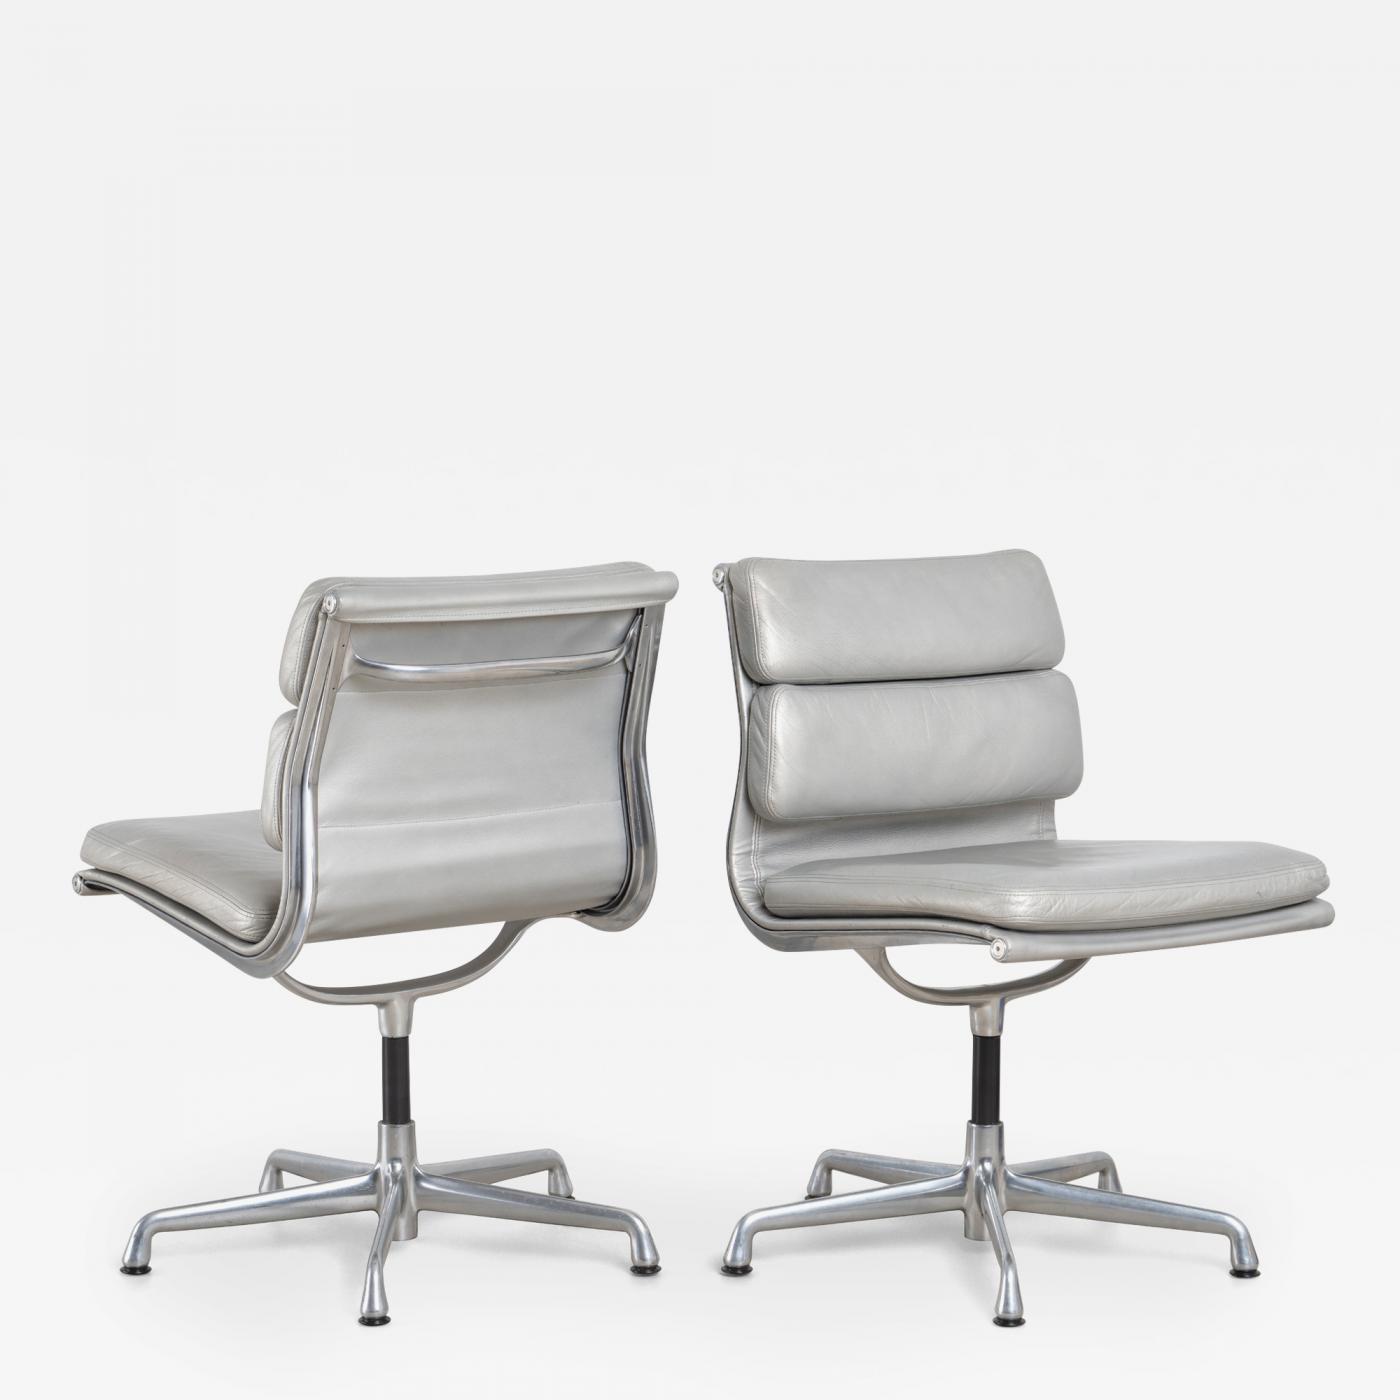 Charles & Ray Eames - Eames Soft Pad Side Chairs in Silver 